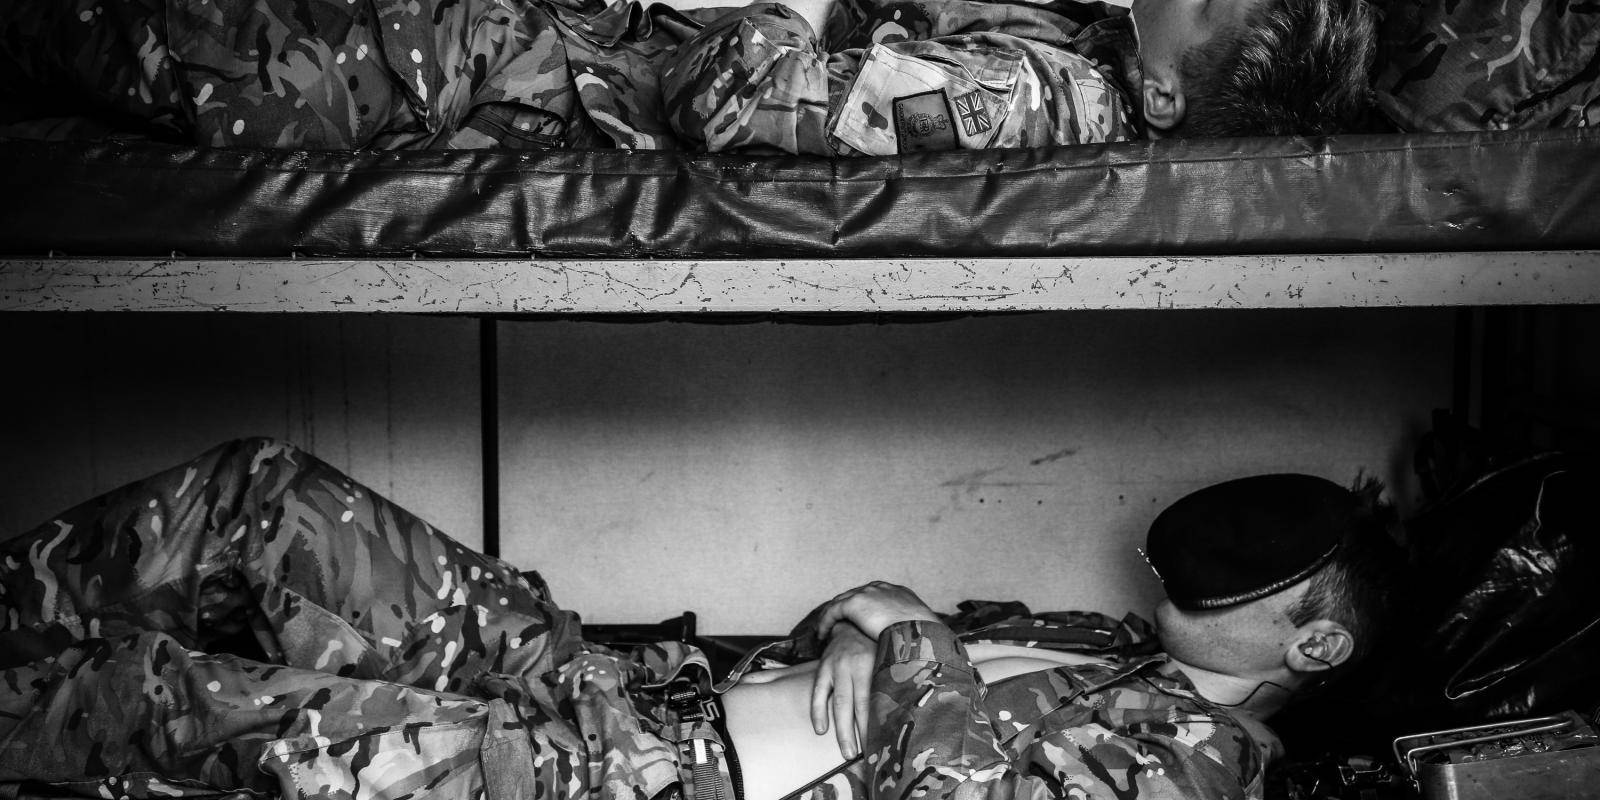 Image shows two soldiers resting